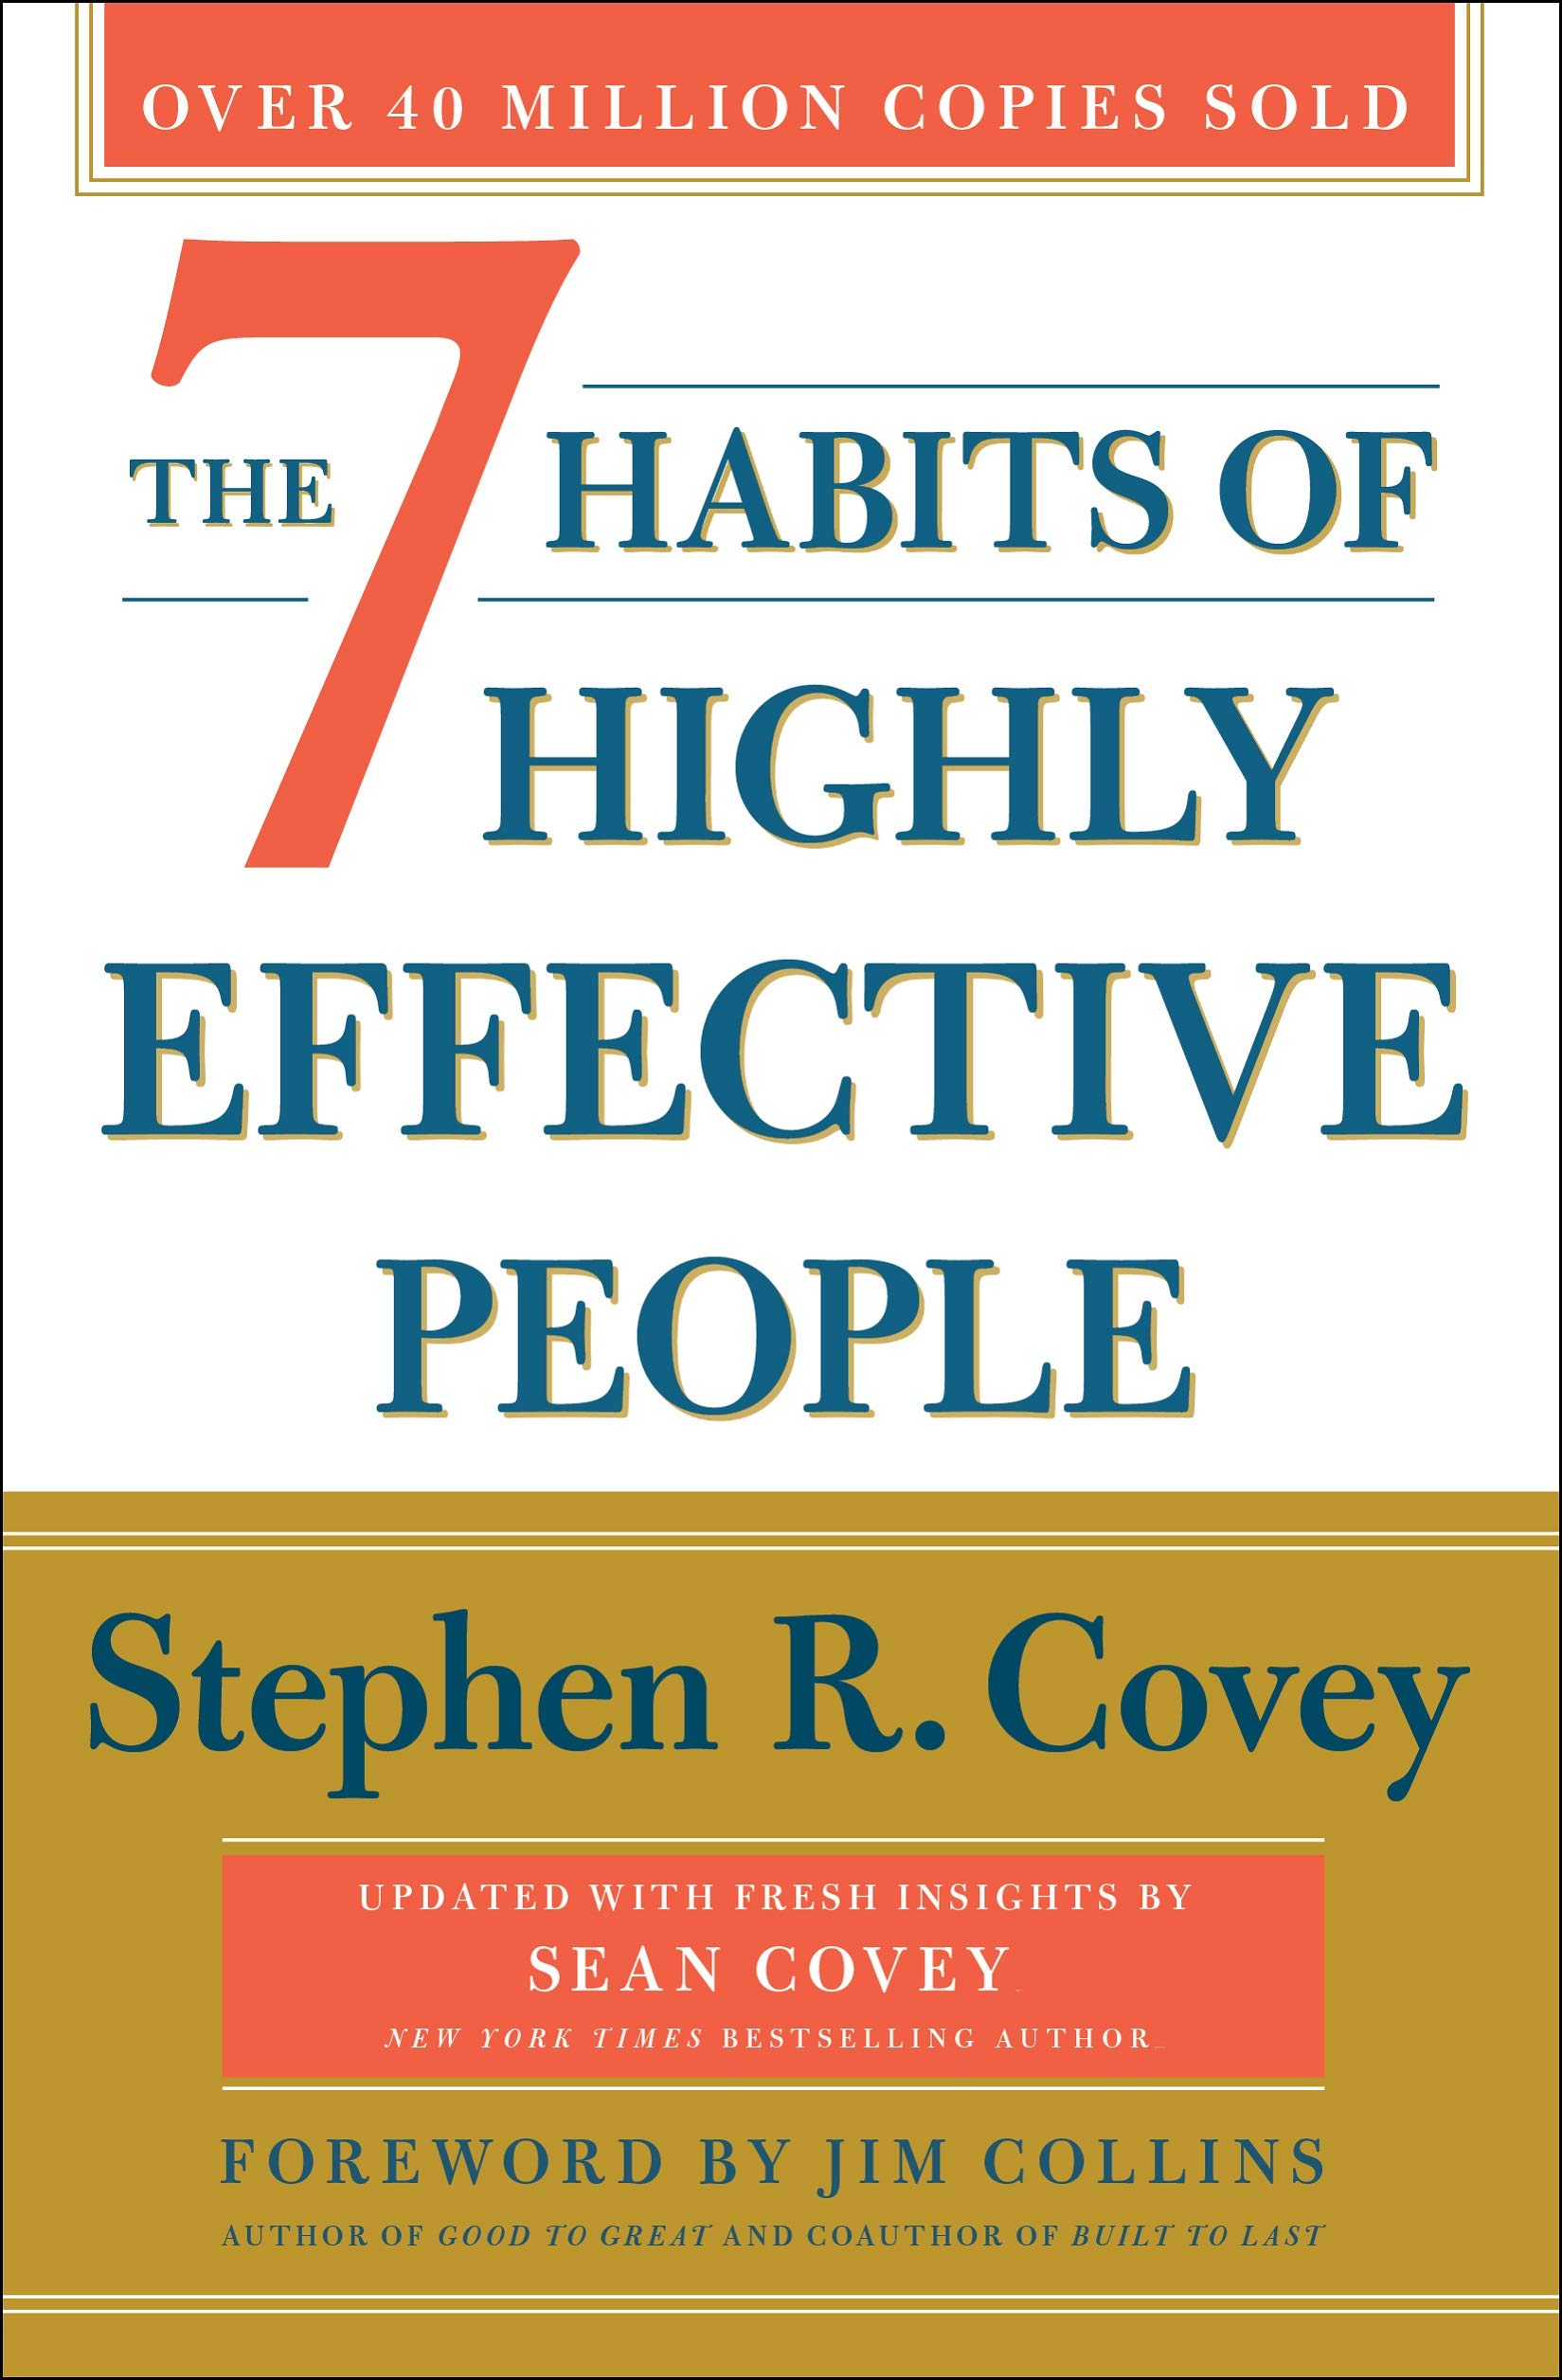 The 7 Habits of Highly Effective People audiobook